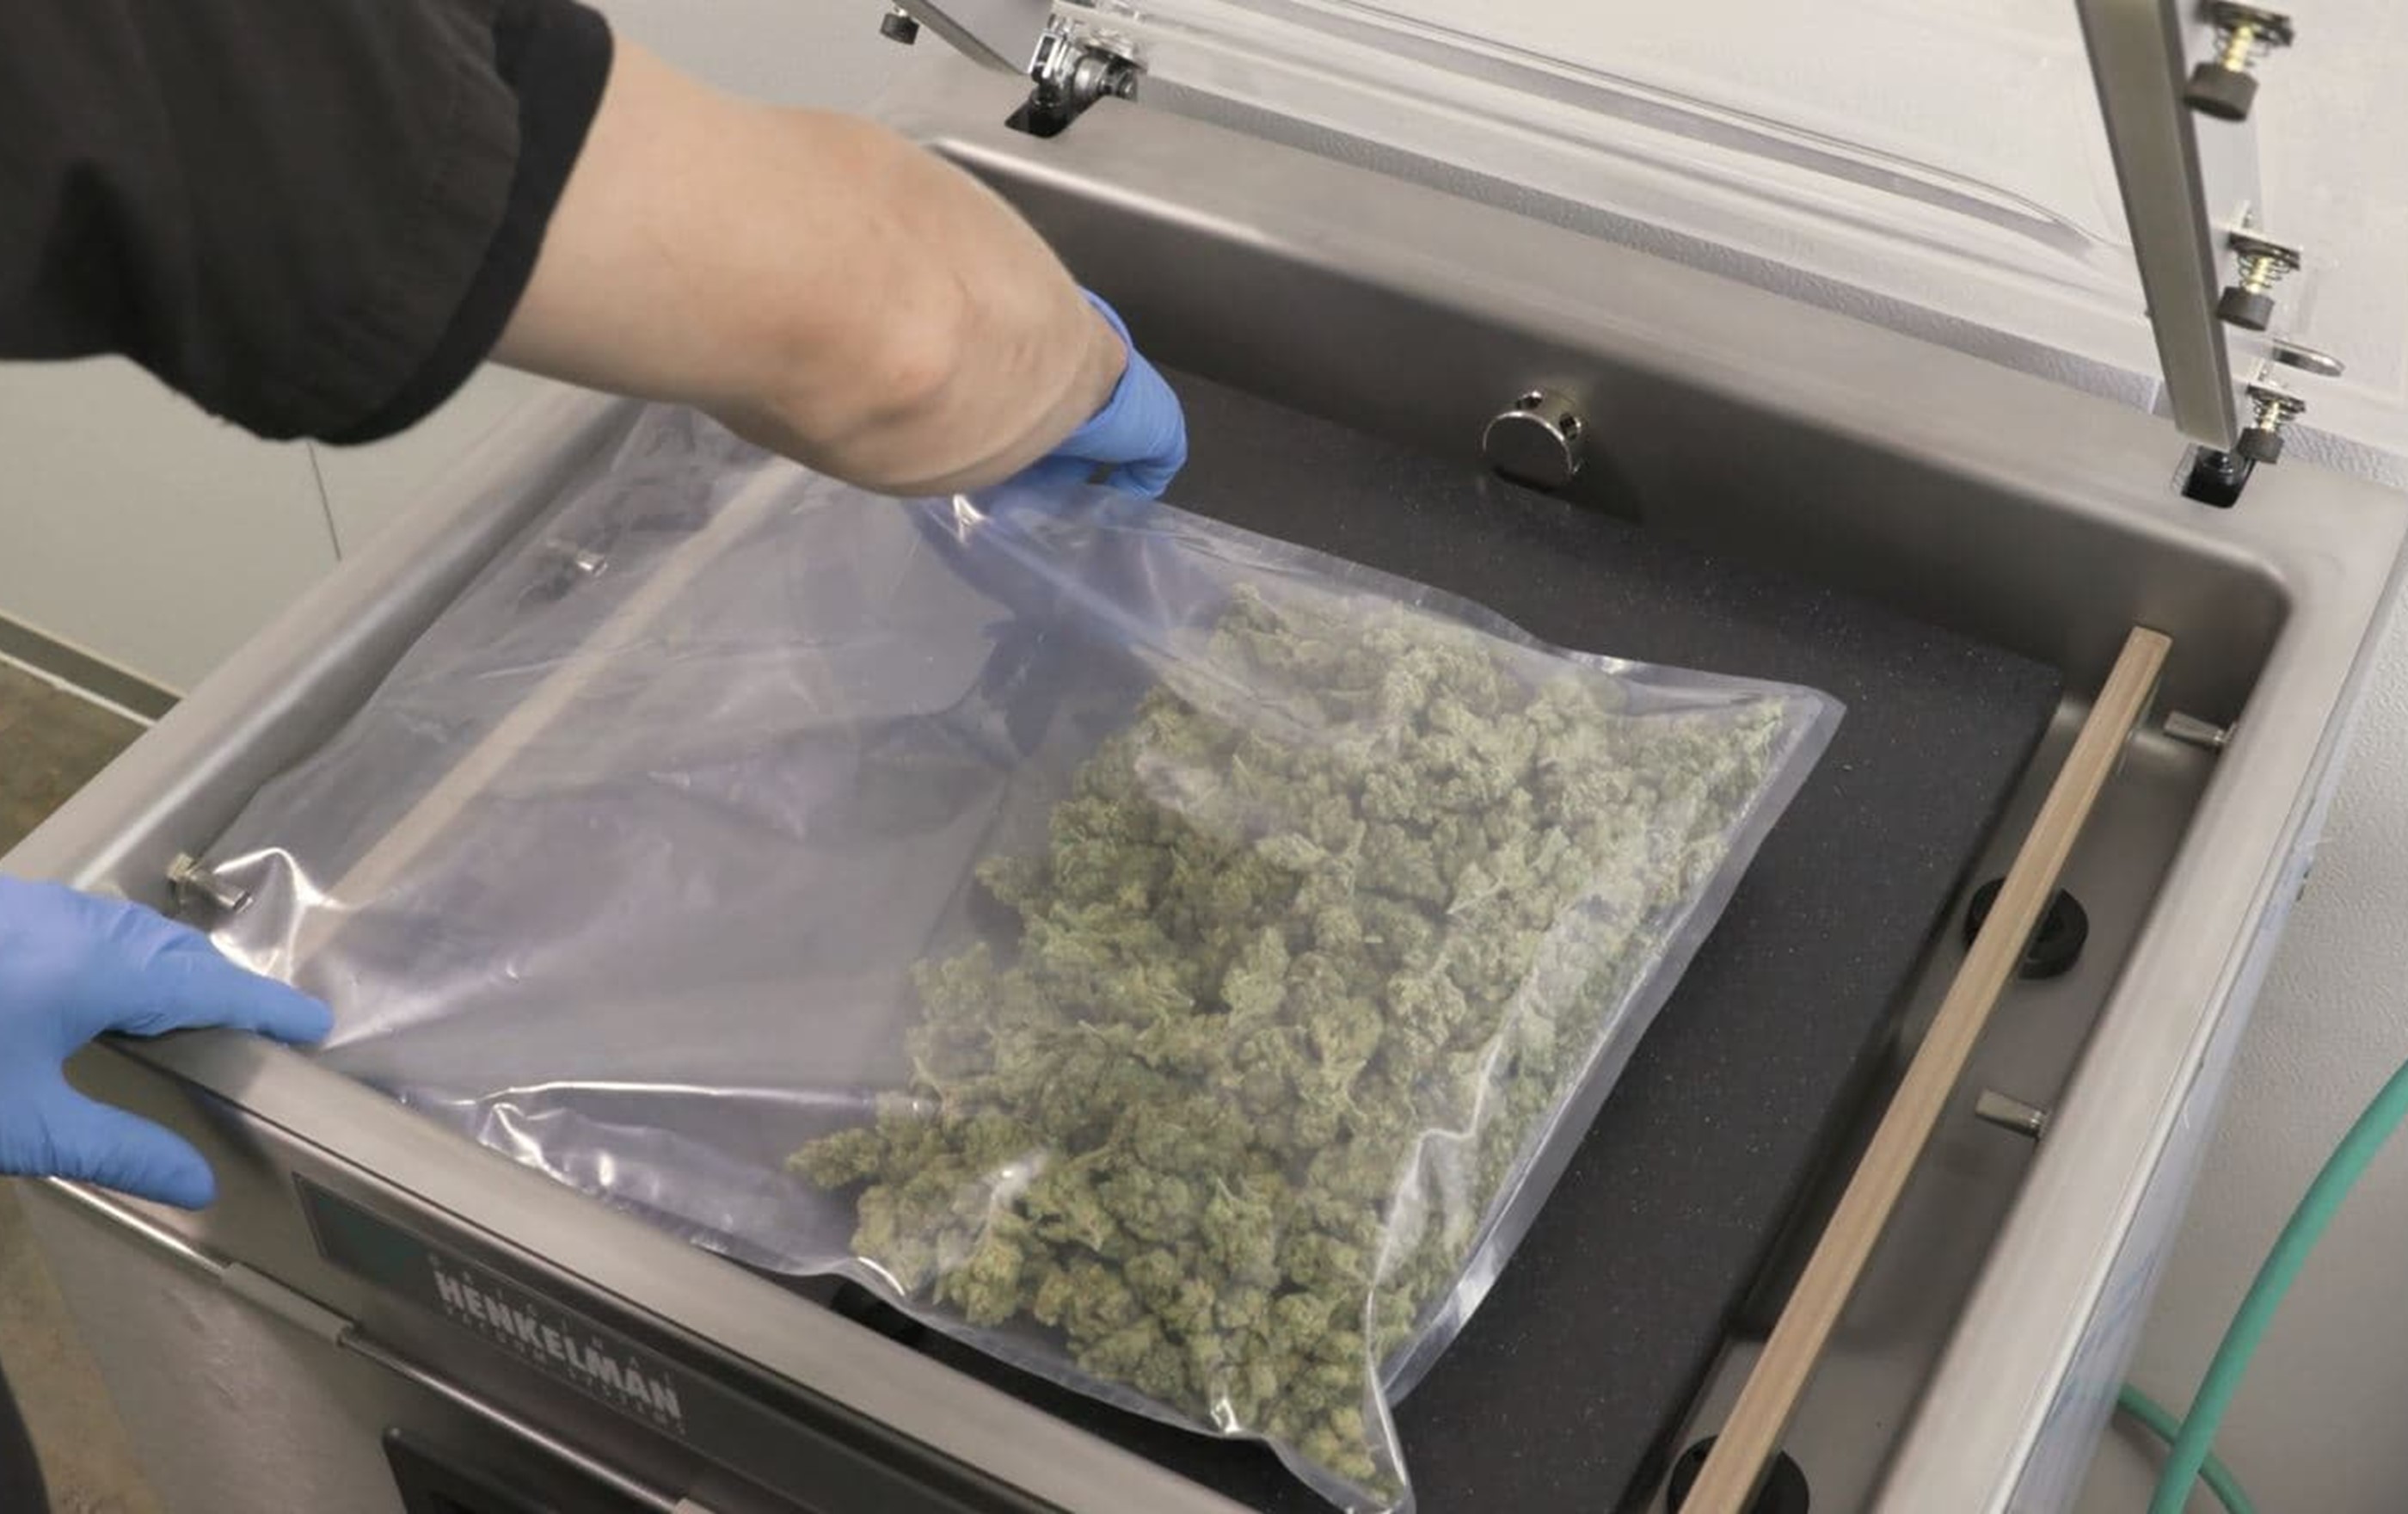 Best way to seal marijuana smell? Pack it in double vacuum-sealed bags